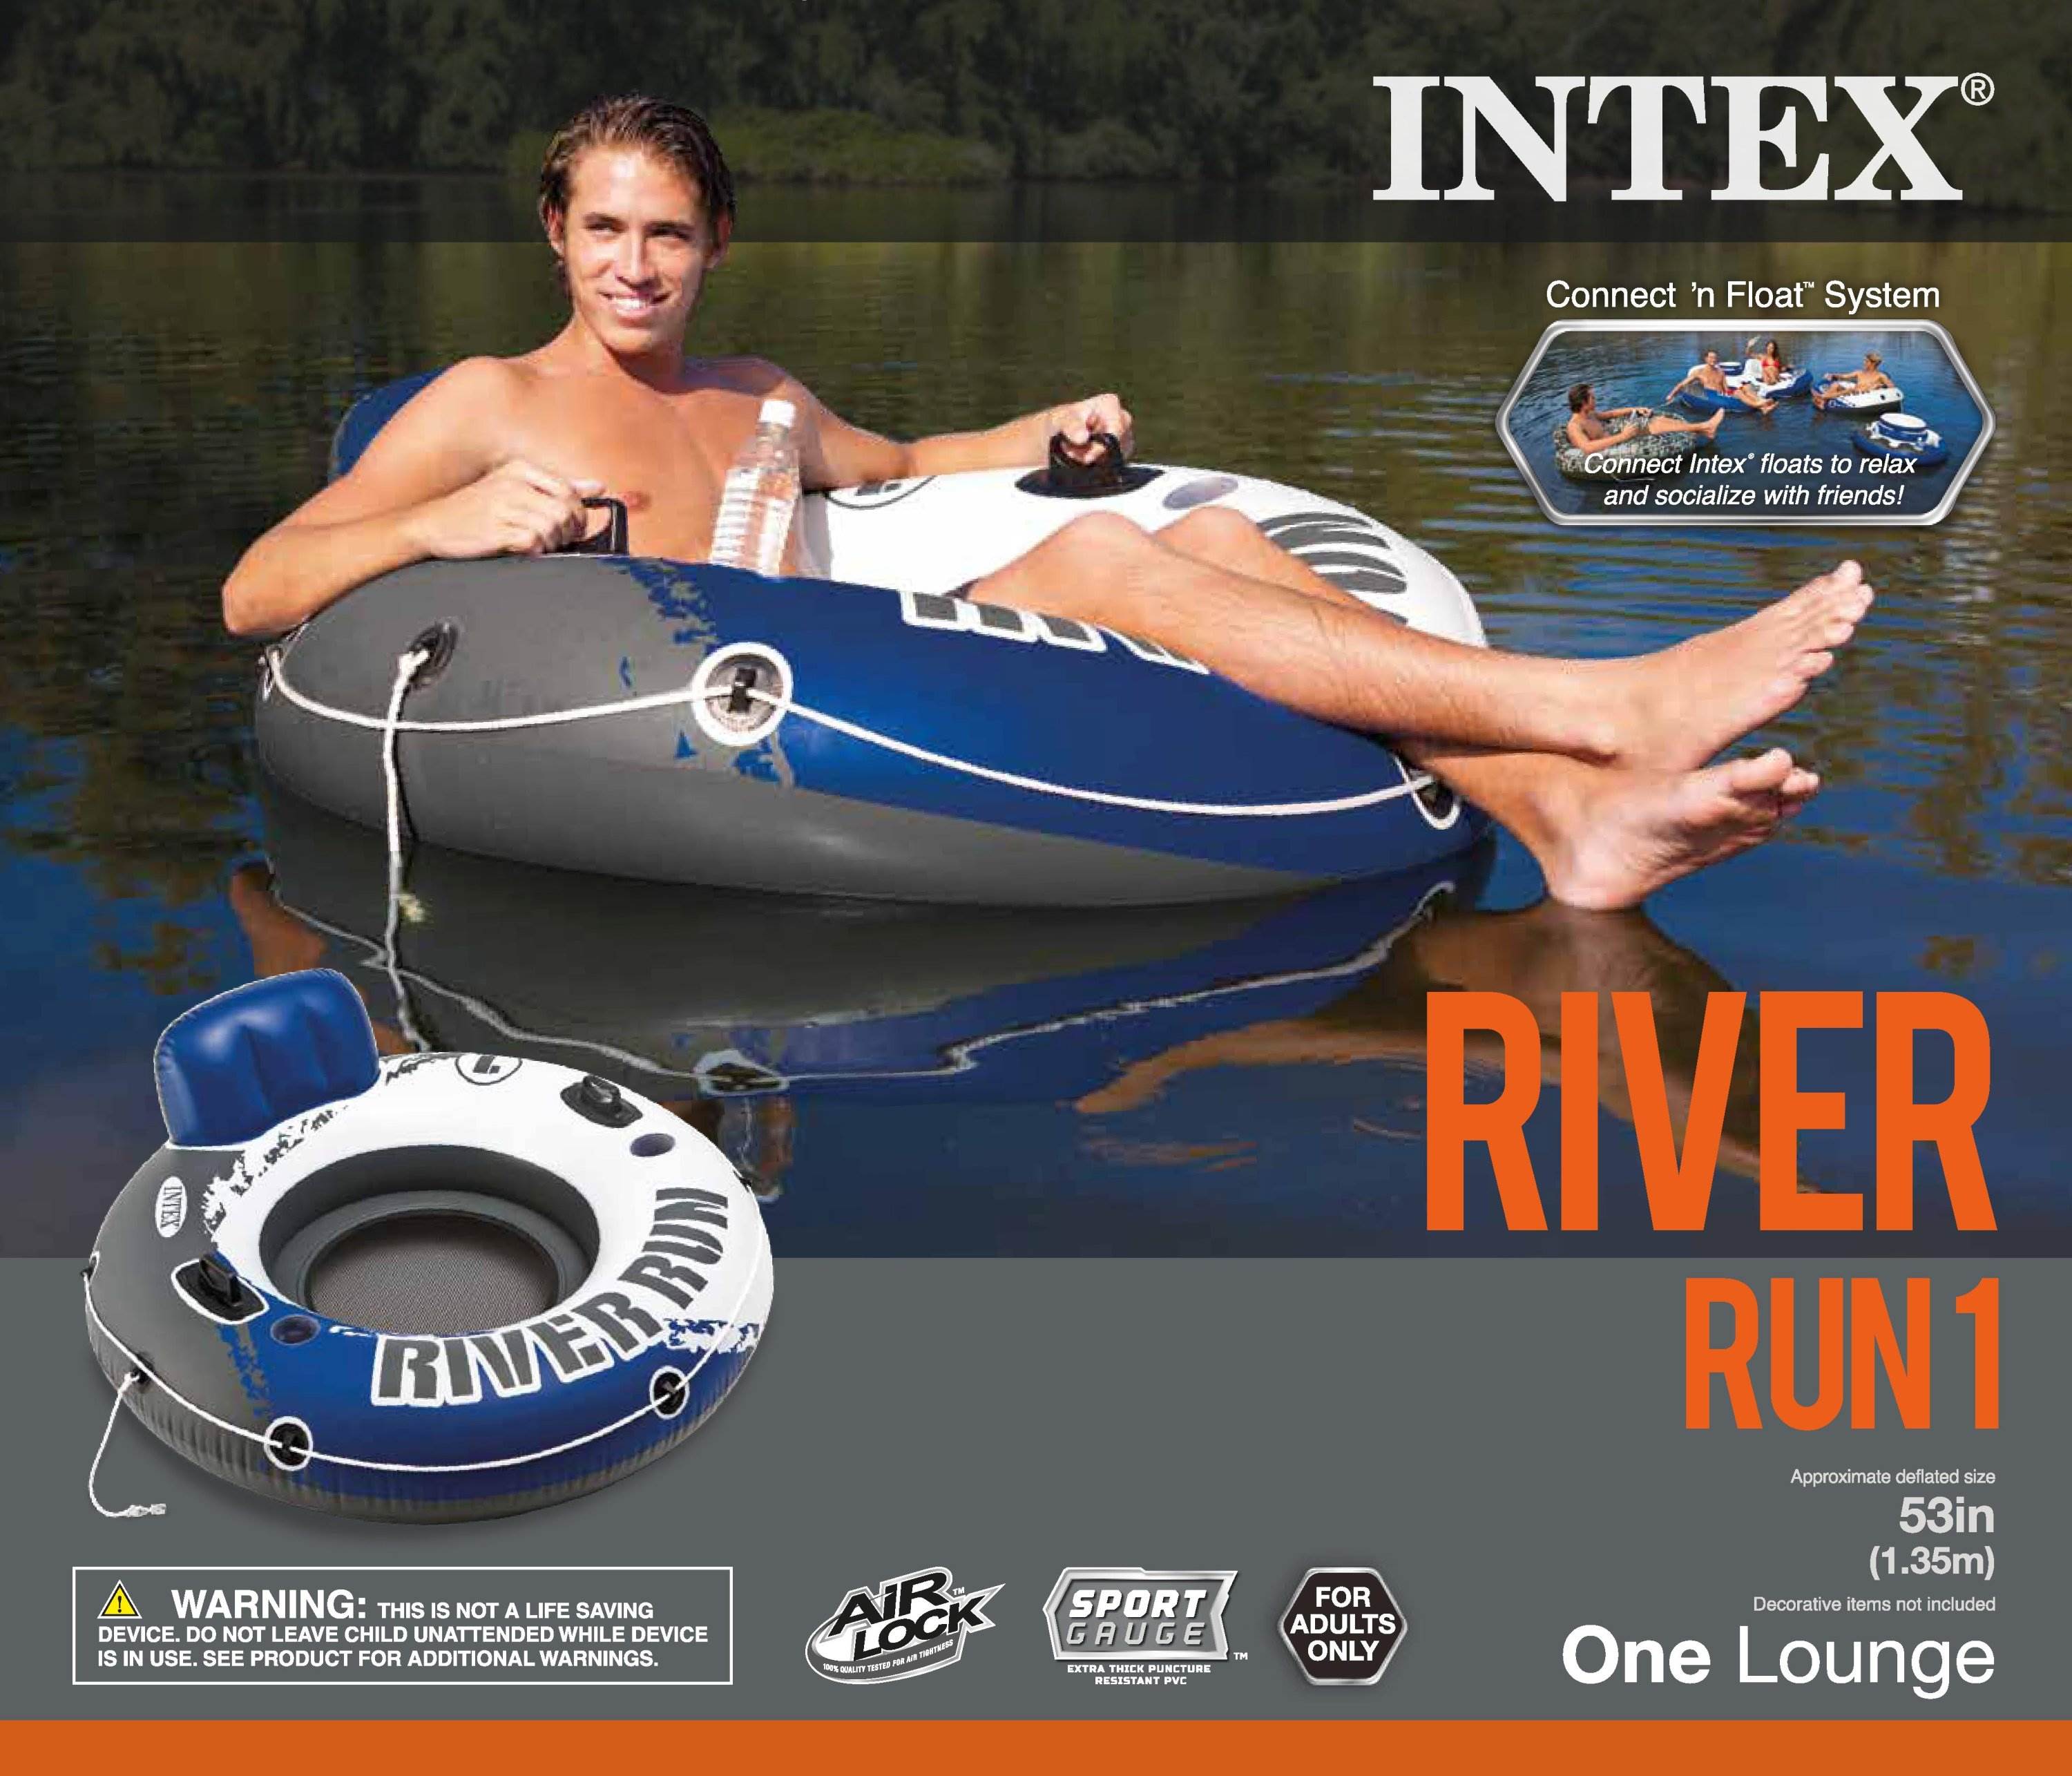 Details about   Intex River Run 1 Person Inflatable Floating Tube Lake/Pool/Ocean Raft 7 Pack